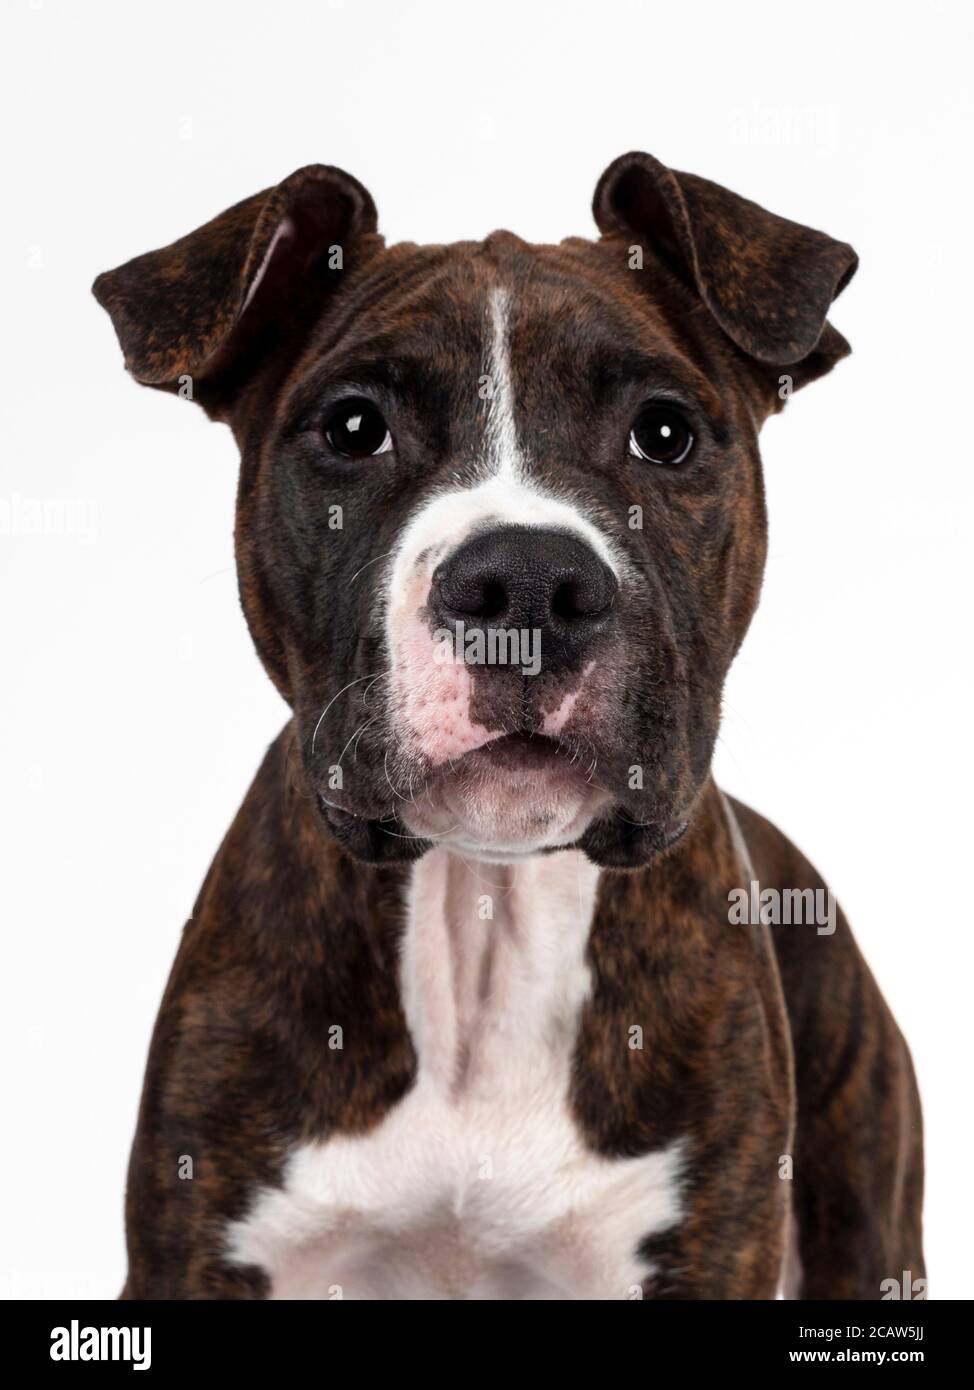 Head shot of young brindle with white American Staffordshire Terrier dog, facing front, looking at camera with dark eyes and floppy ears. Isolated on Stock Photo